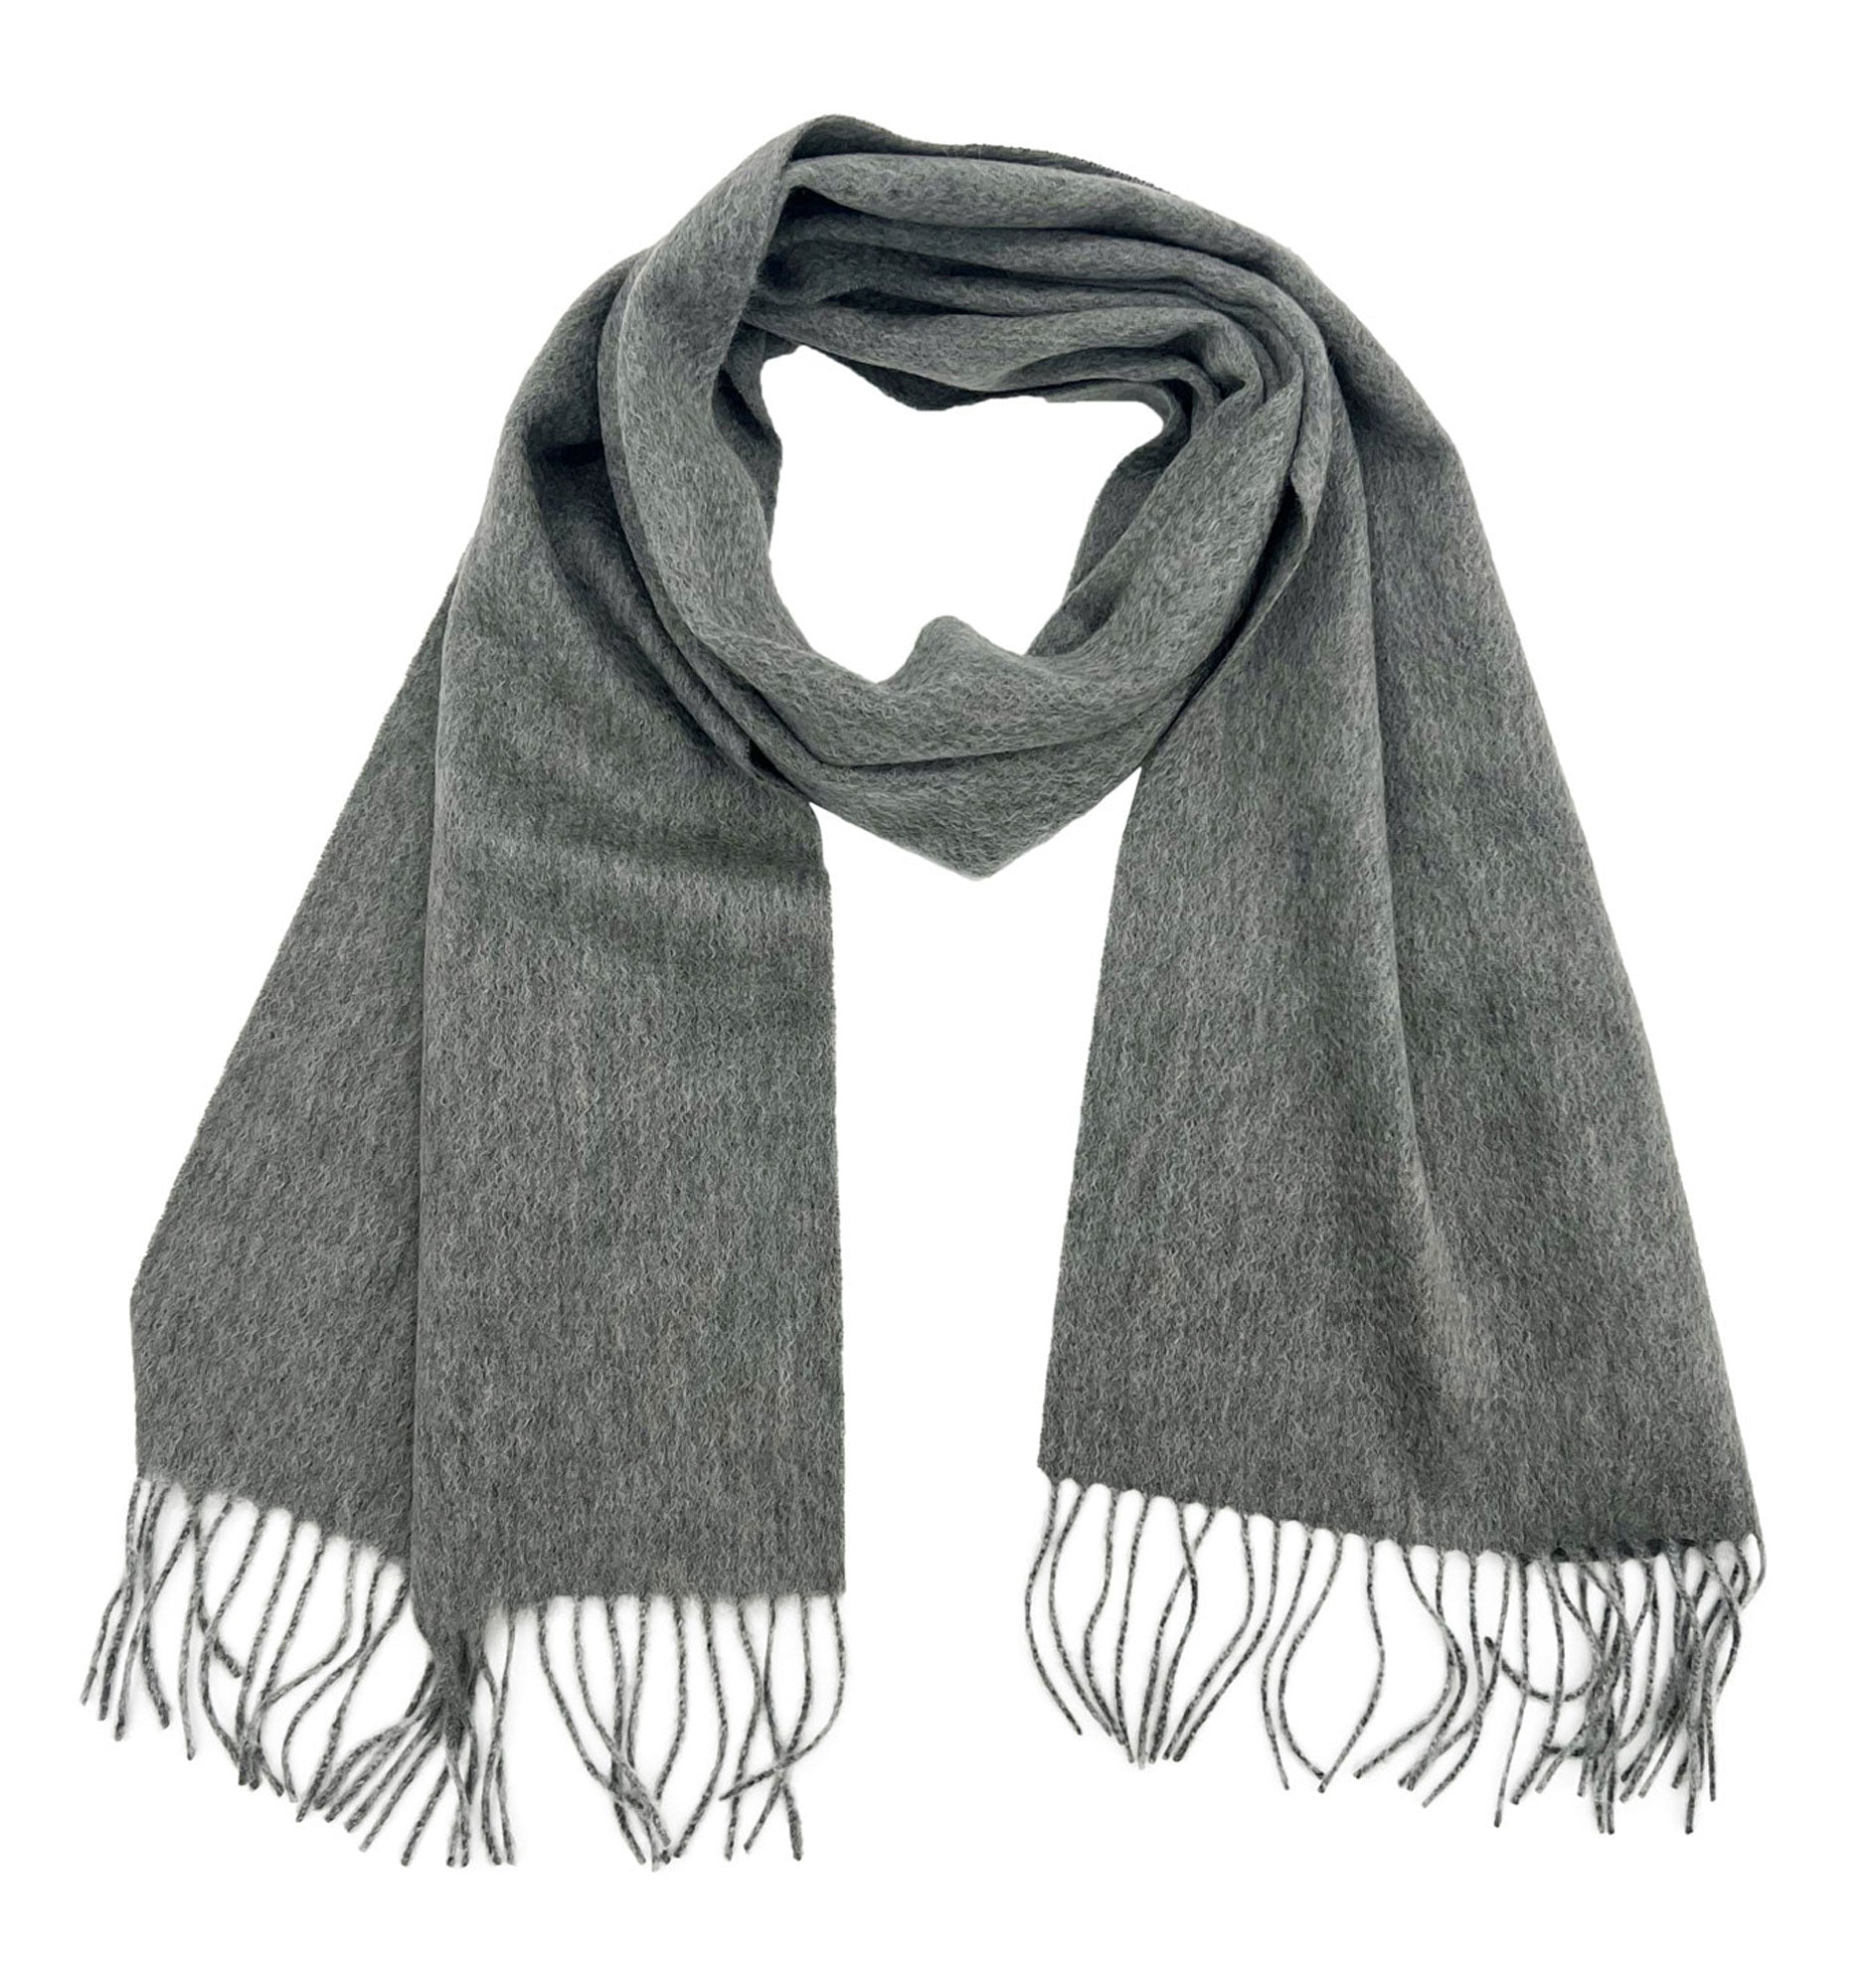 Looped light grey cashmere scarf with both ends parallel and tassles extended.